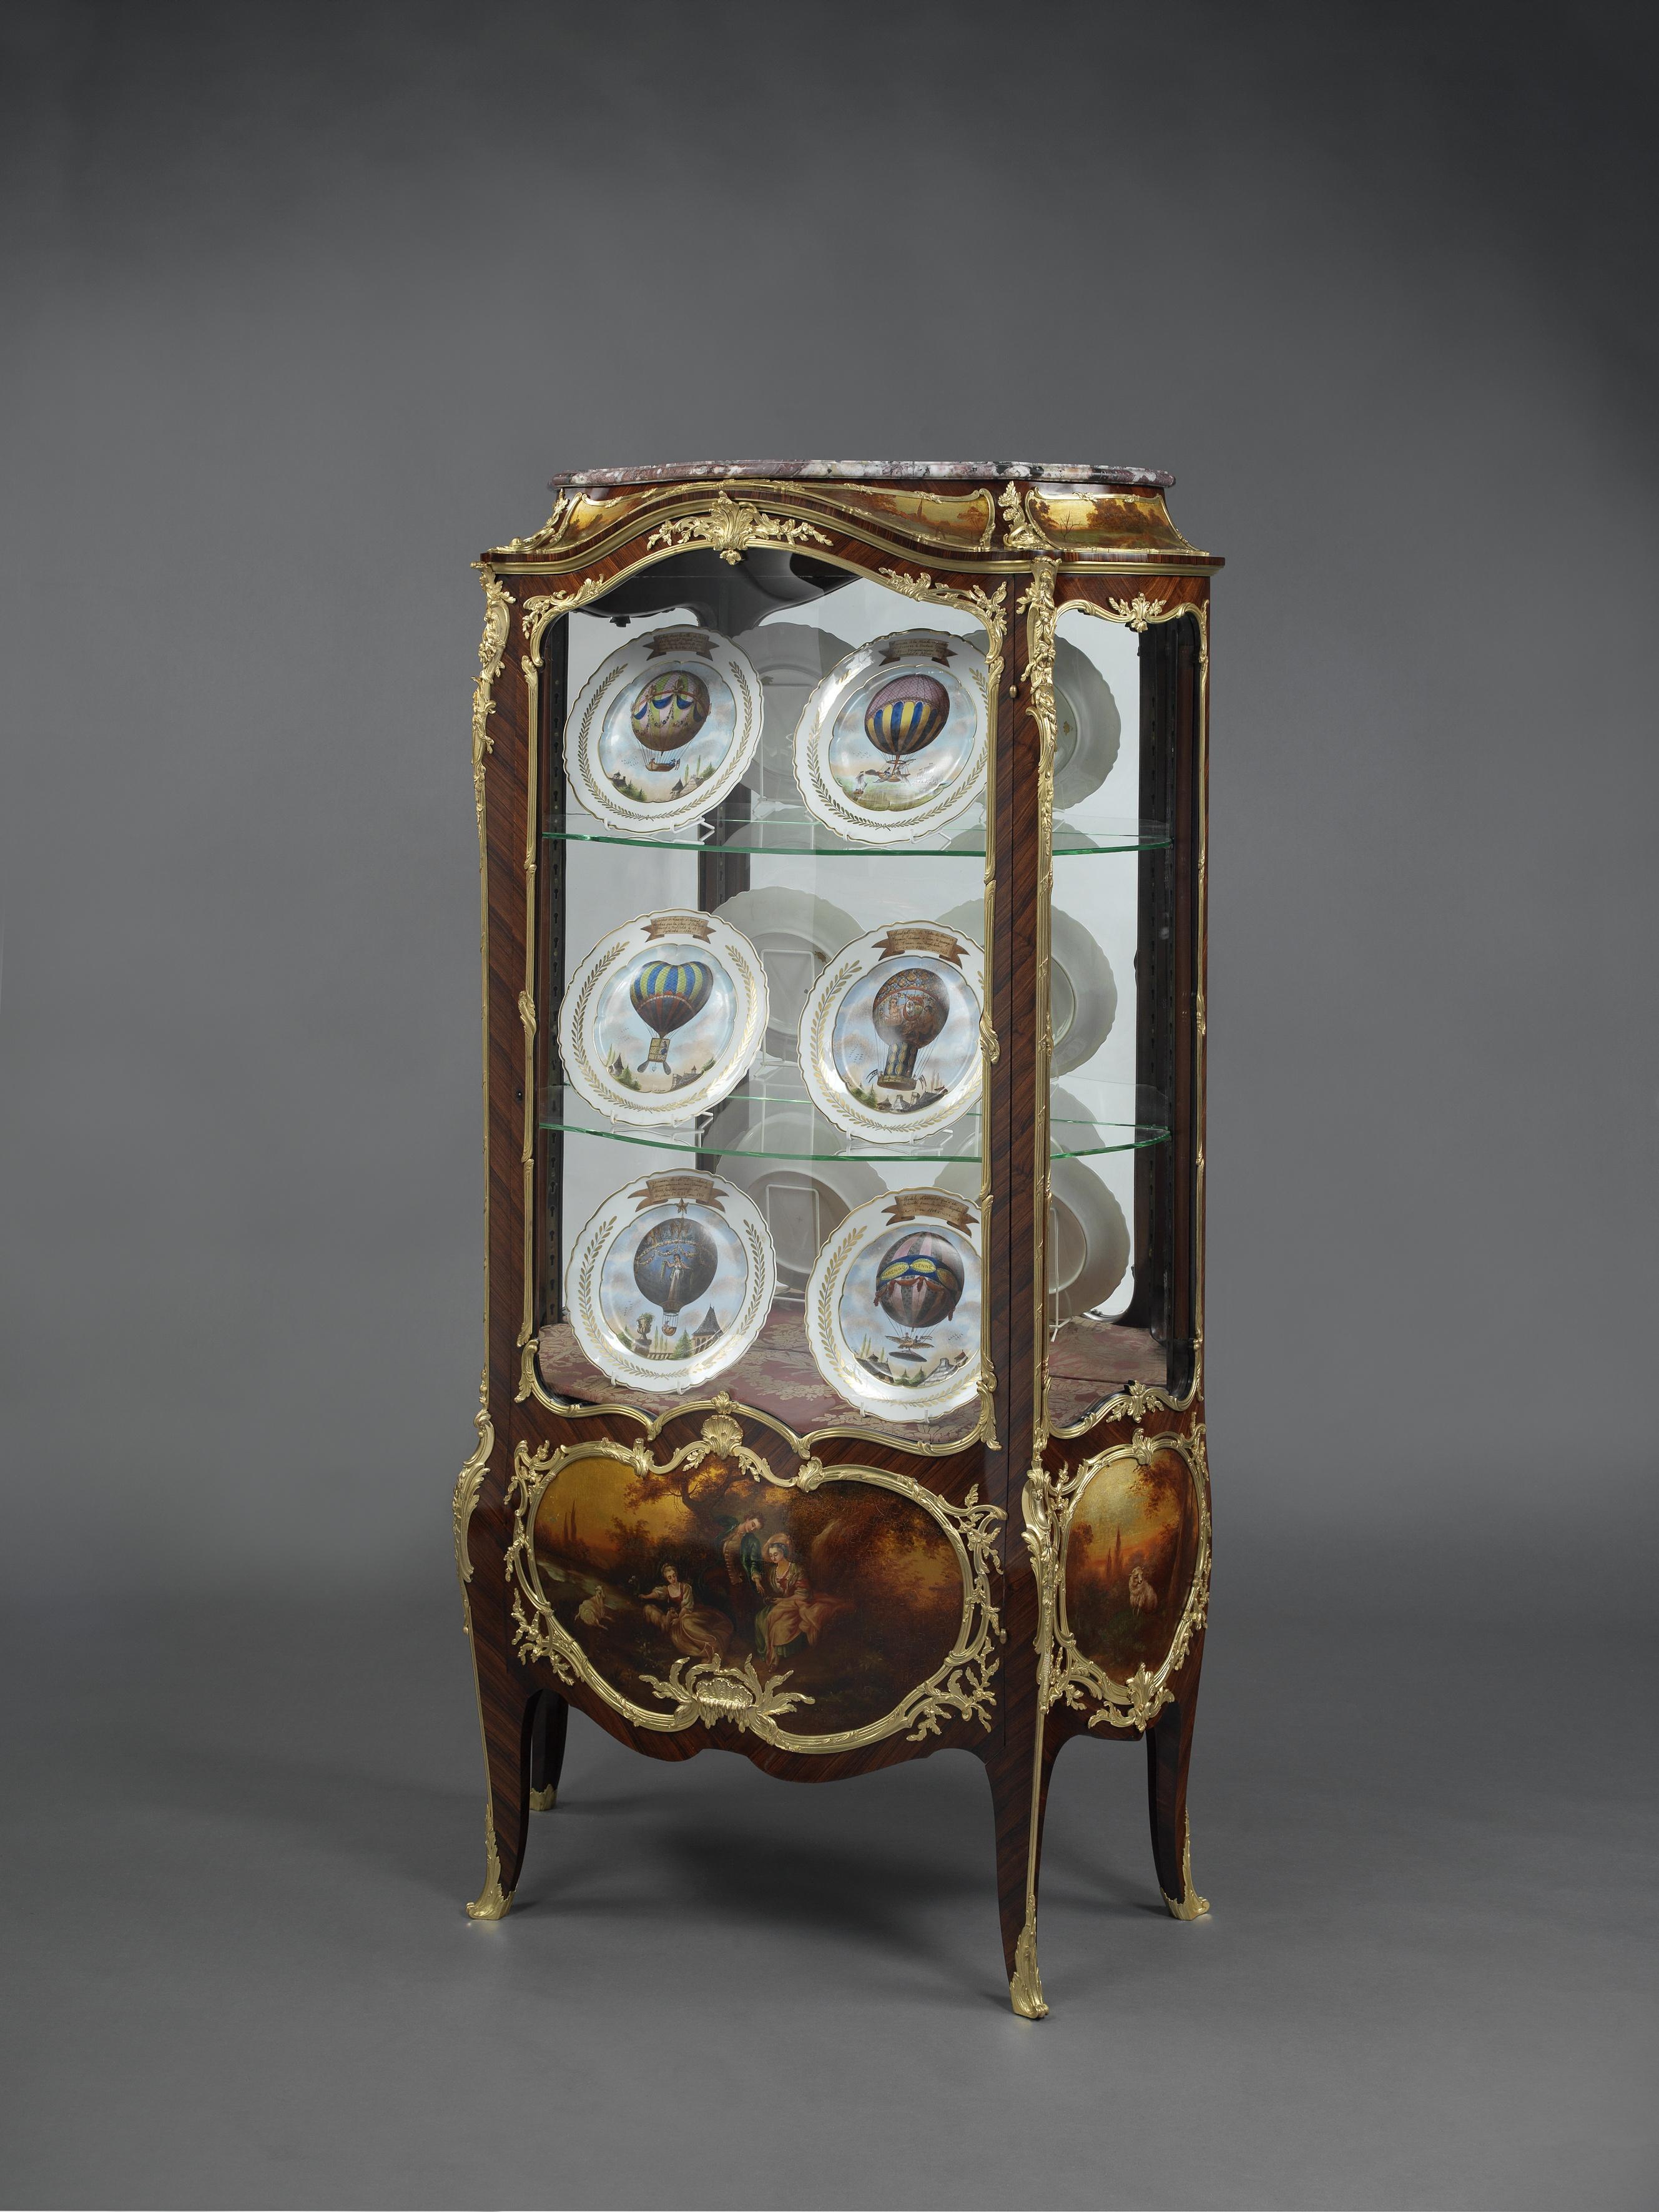 A Fine Louis XV Style Gilt-Bronze Mounted Bombé Vitrine With Vernis Martin Panels, by François Linke.

French, Circa 1900. 

Signed 'F. Linke' to one bronze mount. 
The reverse of the bronze mounts stamped 'FL'. 

Variation of Index No. 103 -